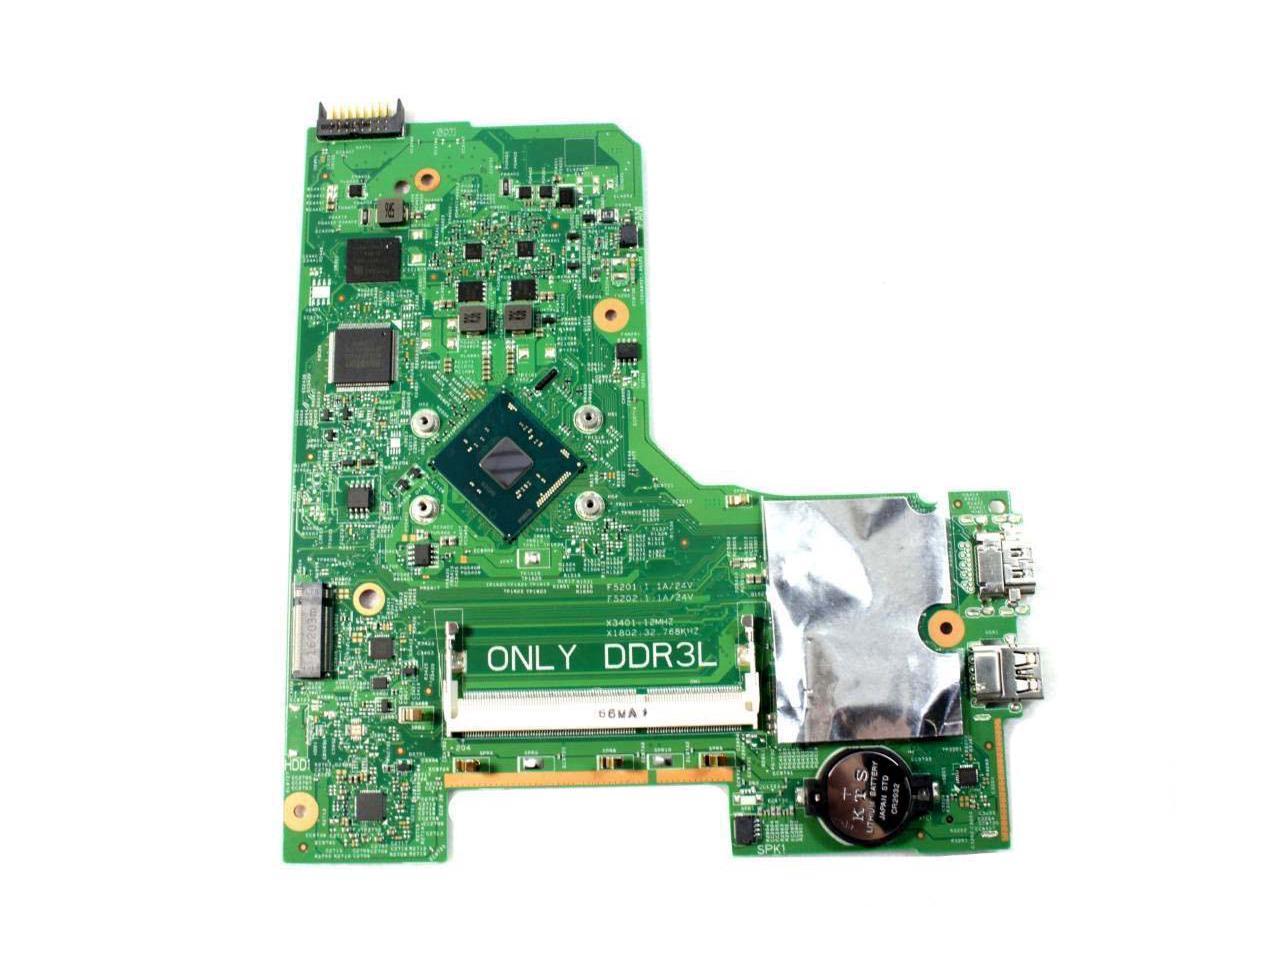 Genuine Dell Inspiron 14 3452 Laptop Motherboard With Intel Celeron N3050 1 6ghz Cpu 6x3 0dtrw Cn 00dtrw Newegg Com